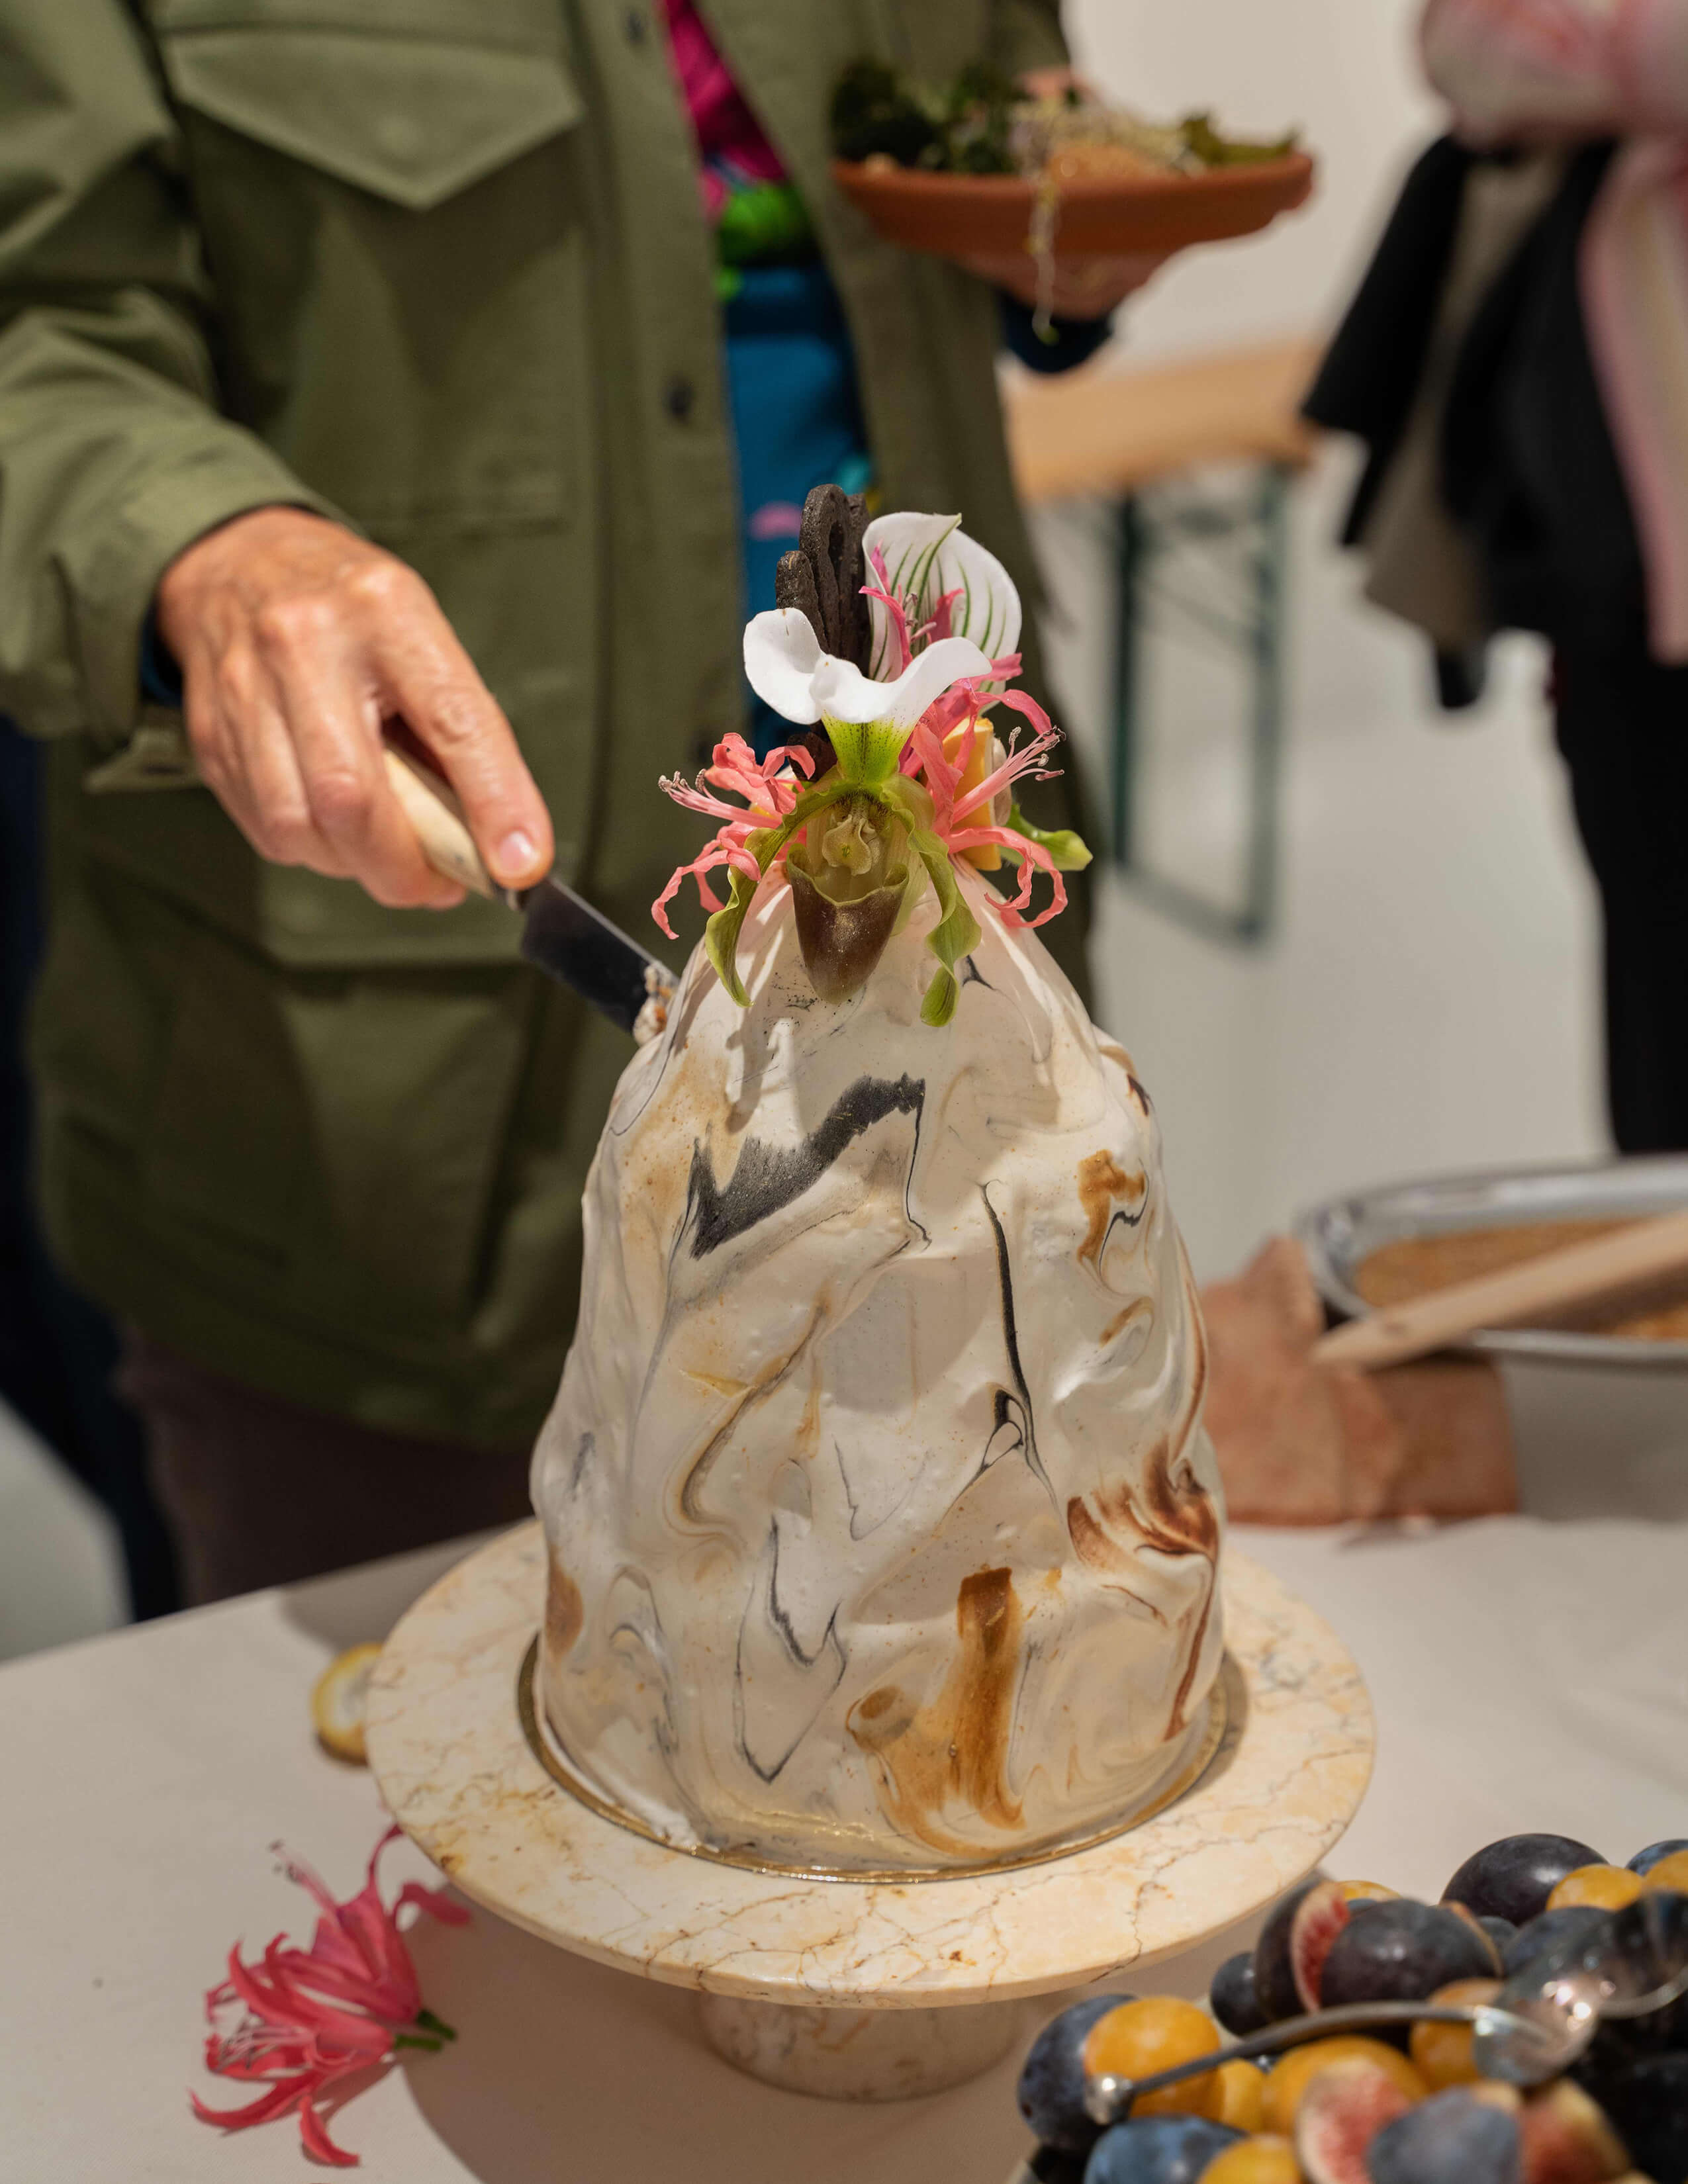 A person held a knife to cut the artistic cake while holding a plate of food on the other hand.